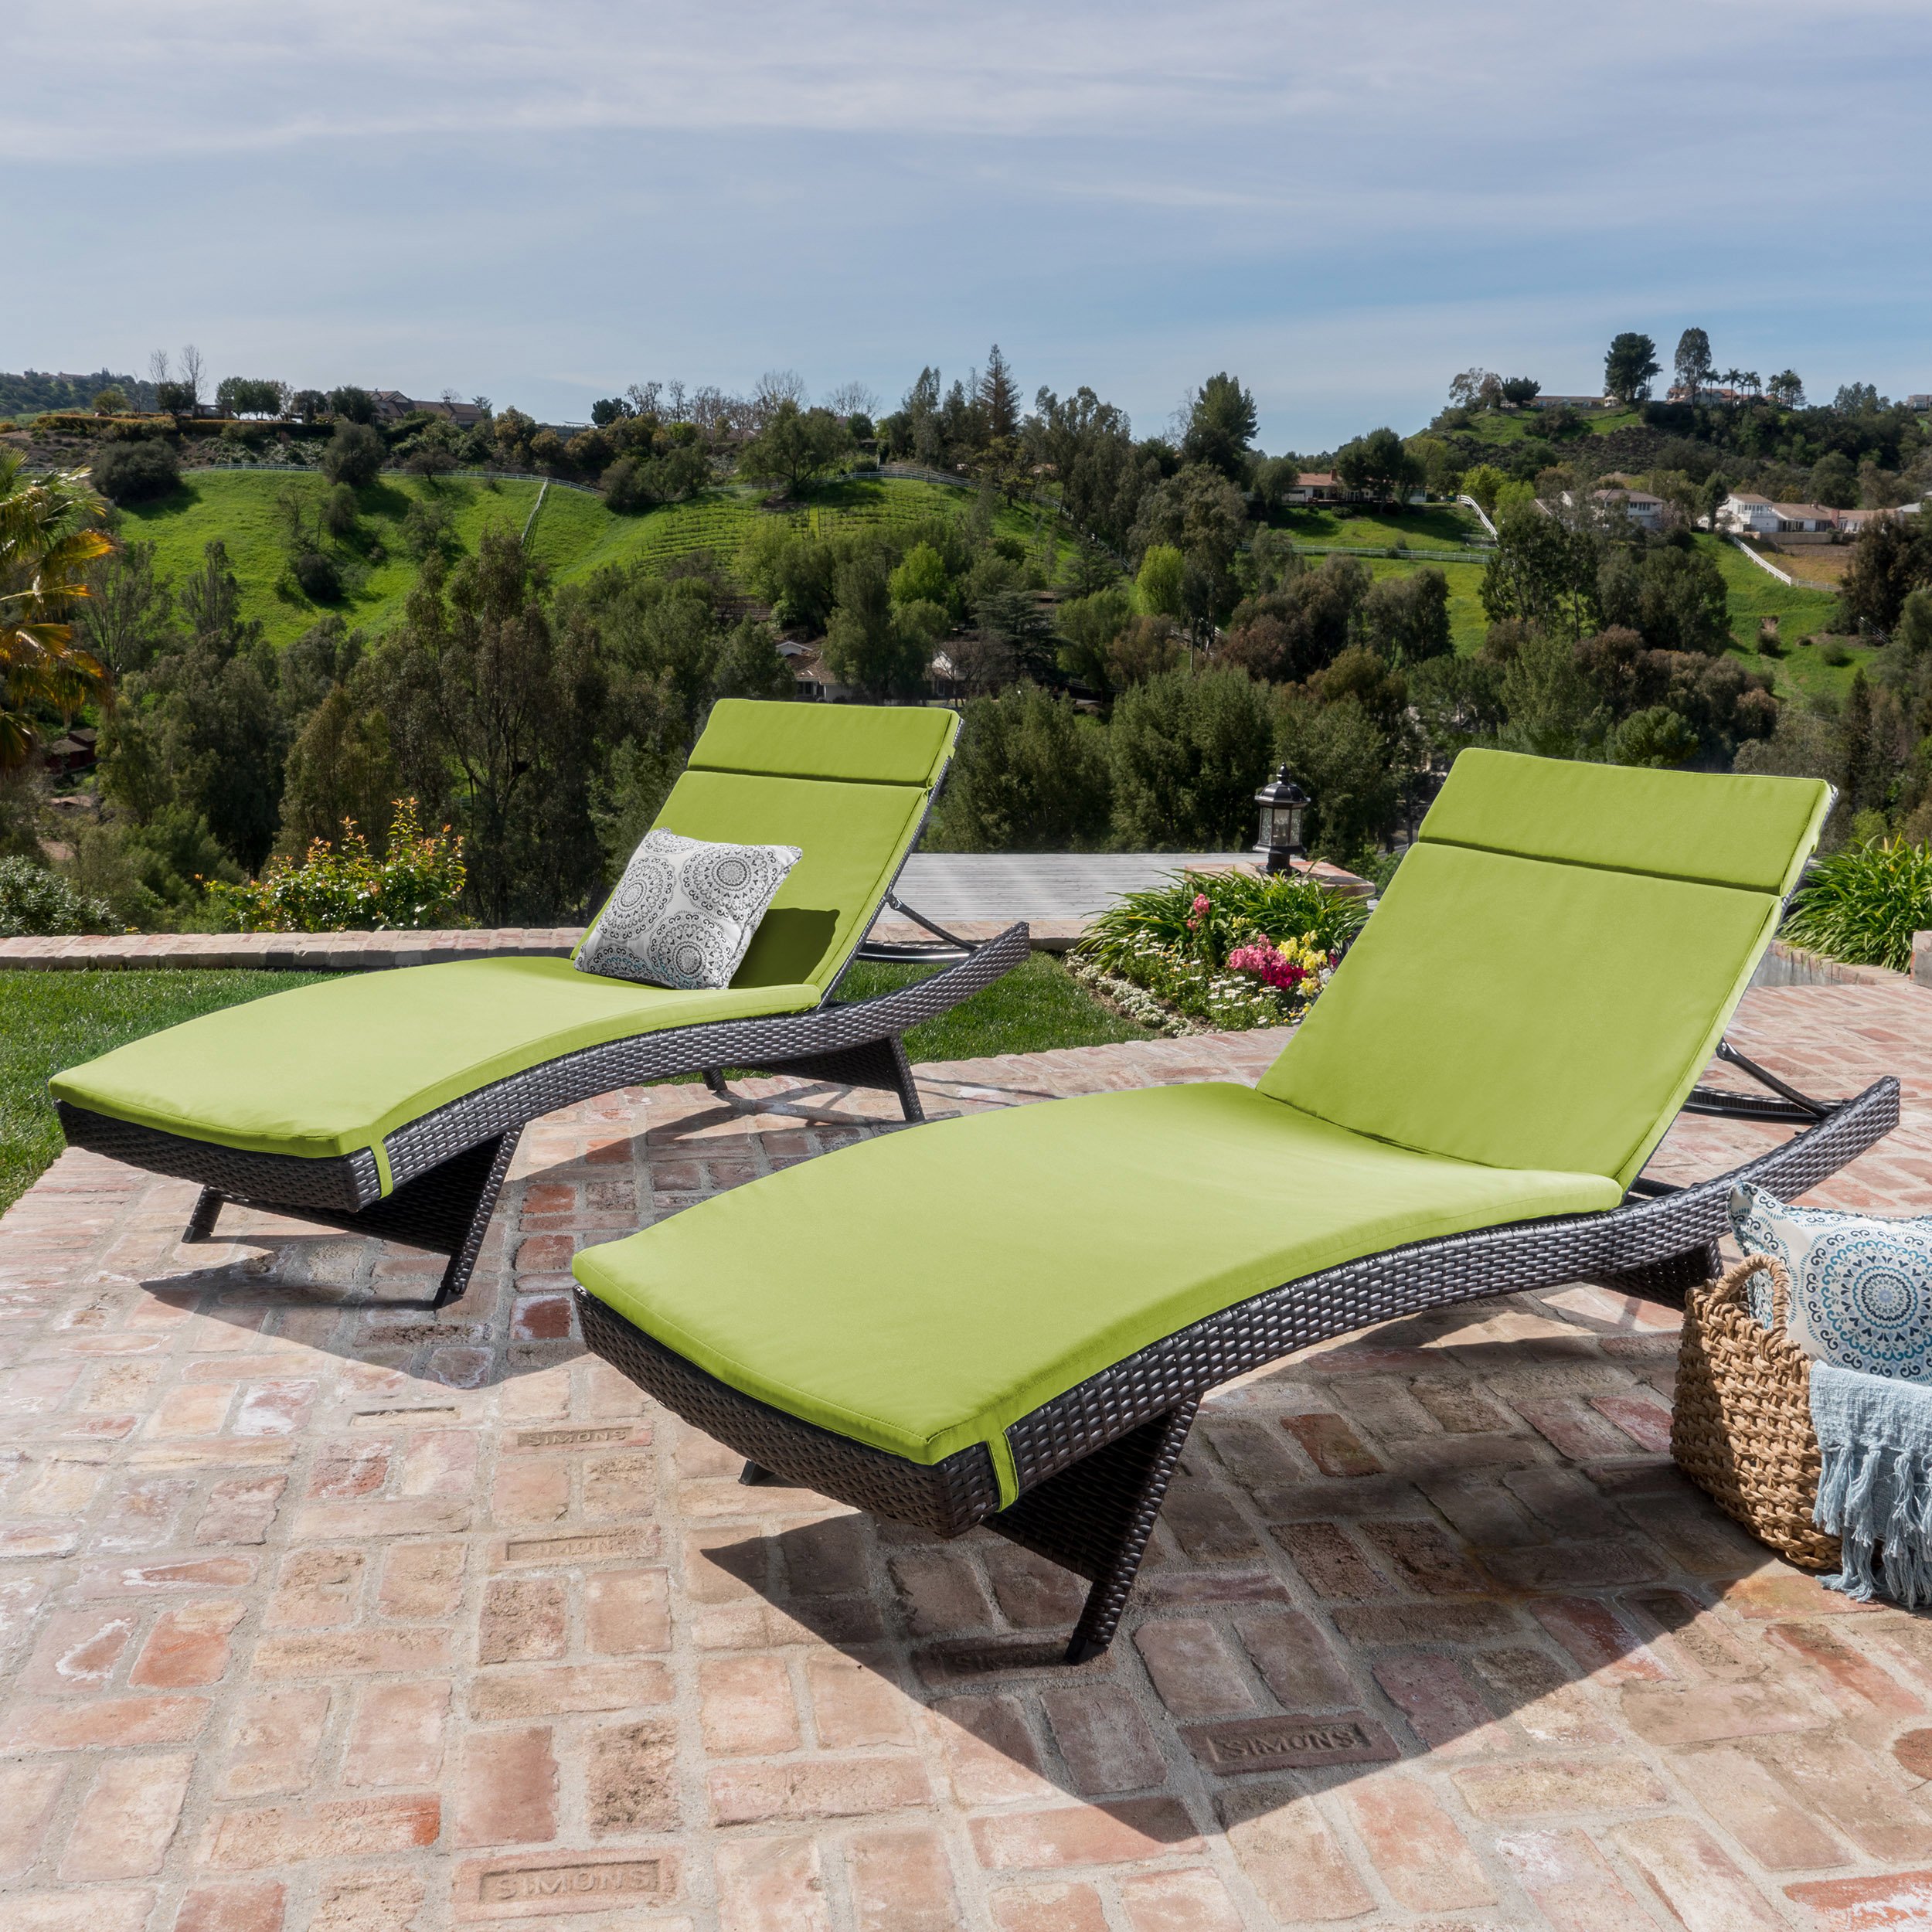 Lakeport Outdoor Adjustable Chaise Lounge Chairs With Cushions (set Of 2) - Green Cushion